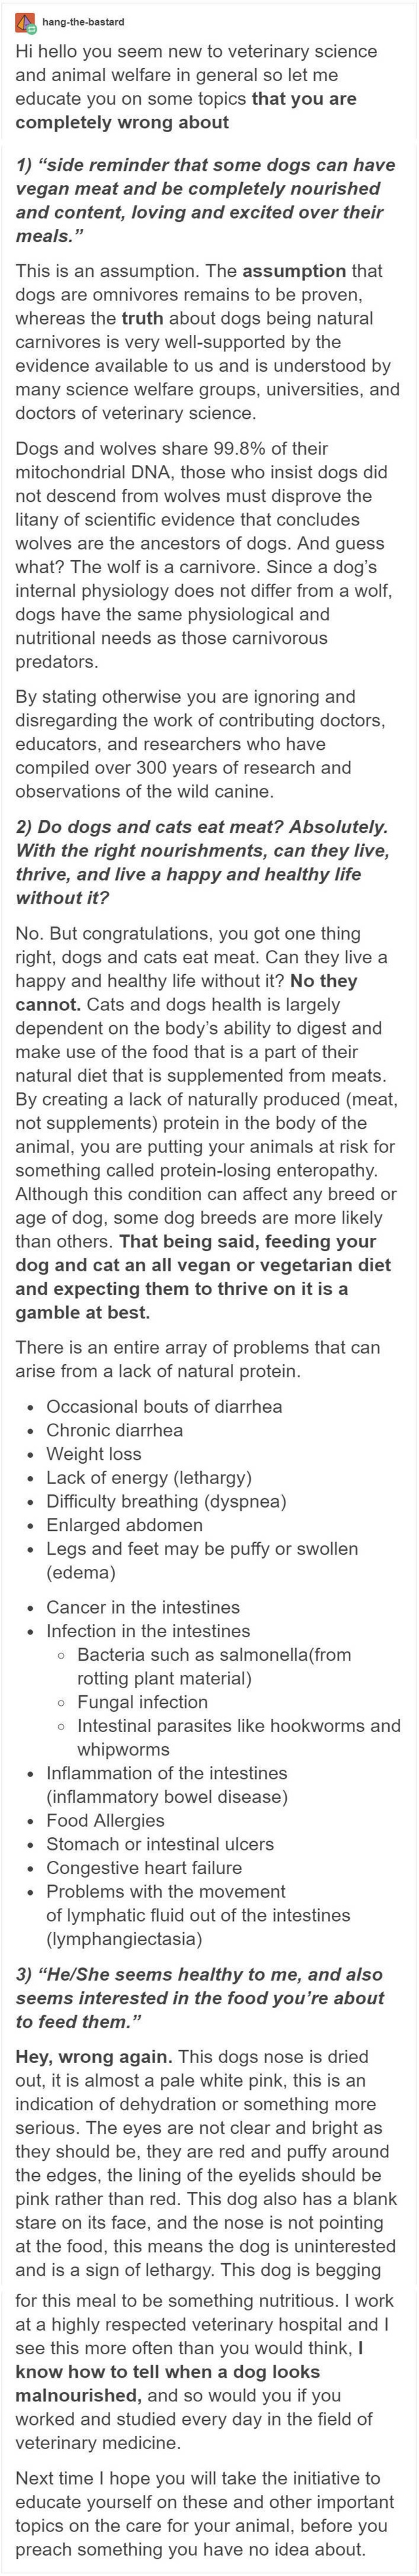 Dogs Are Not Vegans